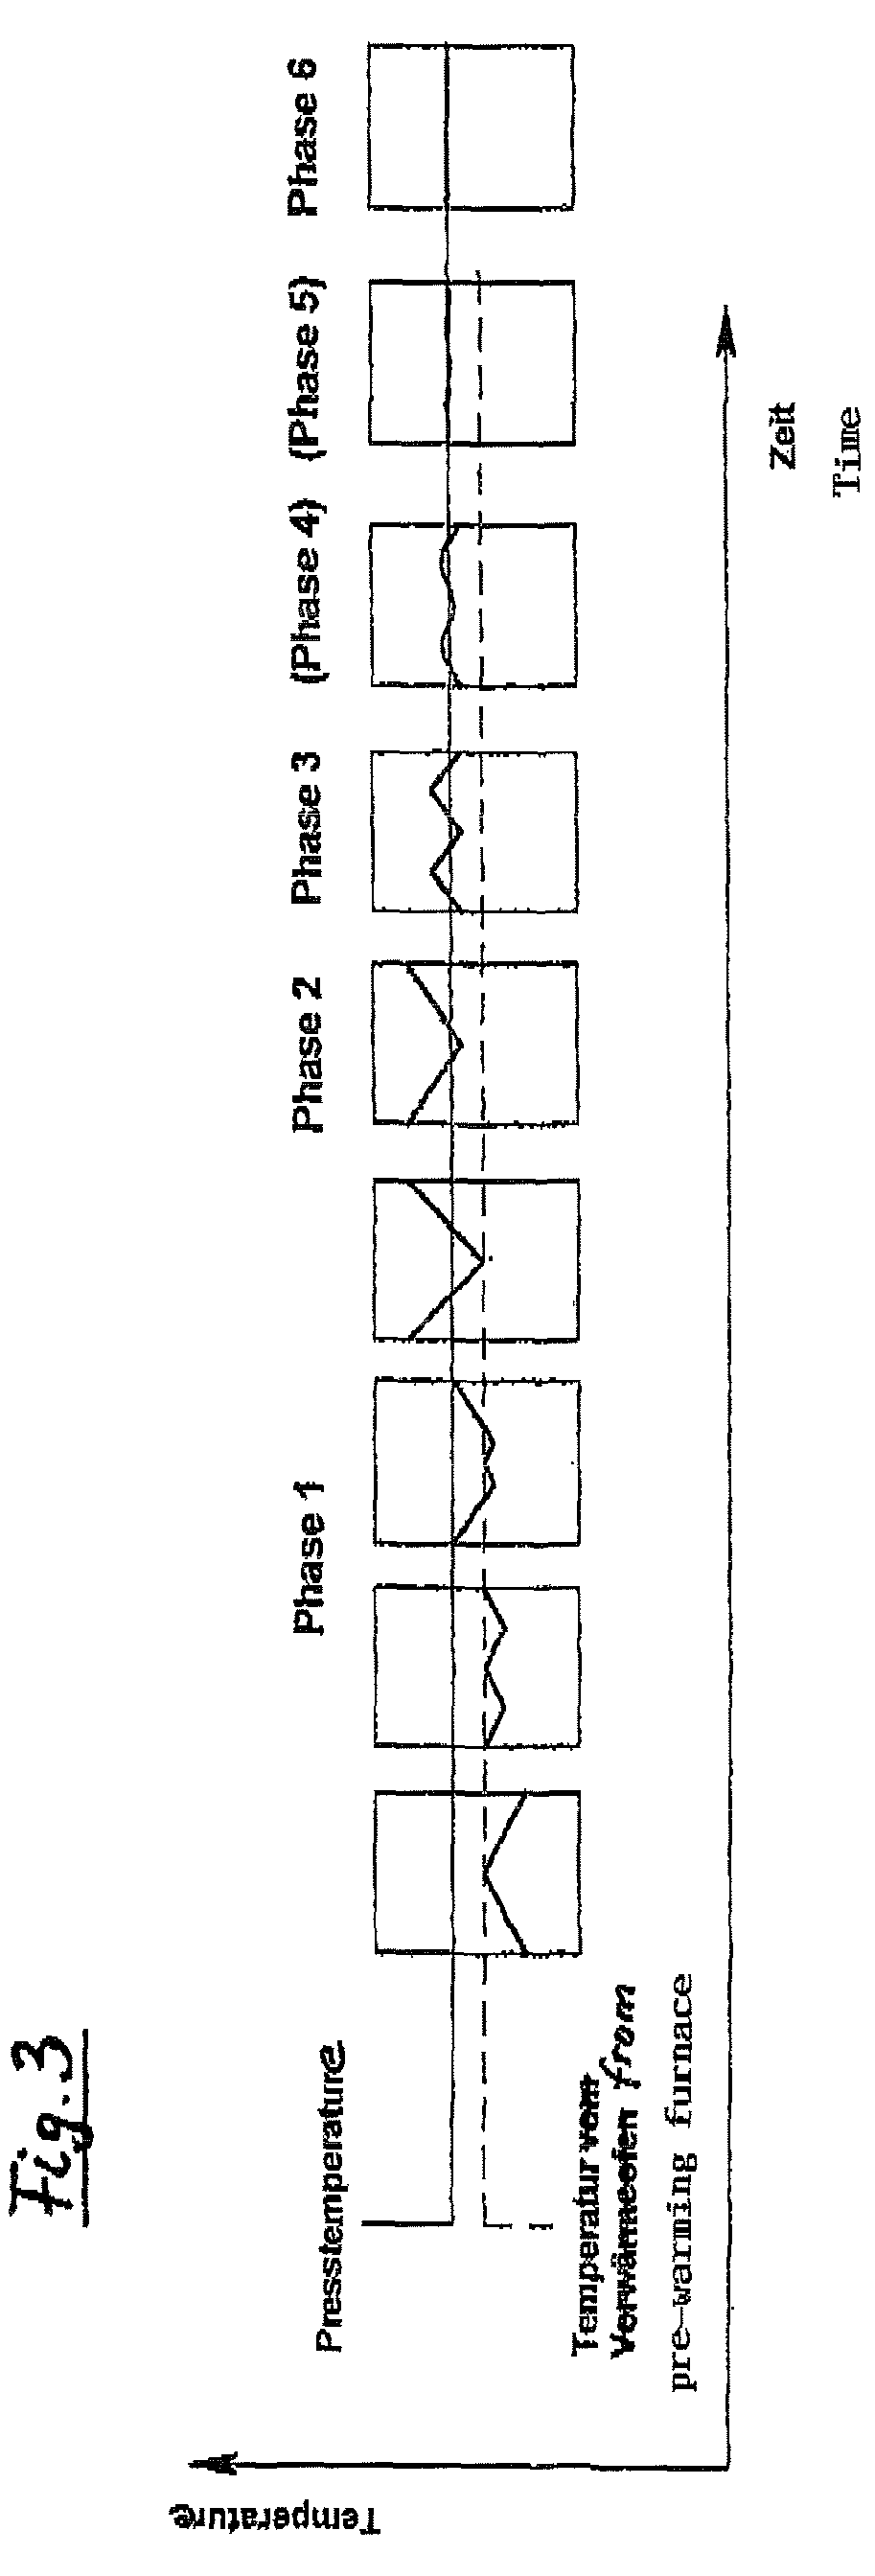 Method for heating a pre-warmed muffle used for dental ceramics in a dental furnace and control device and furnace containing said device